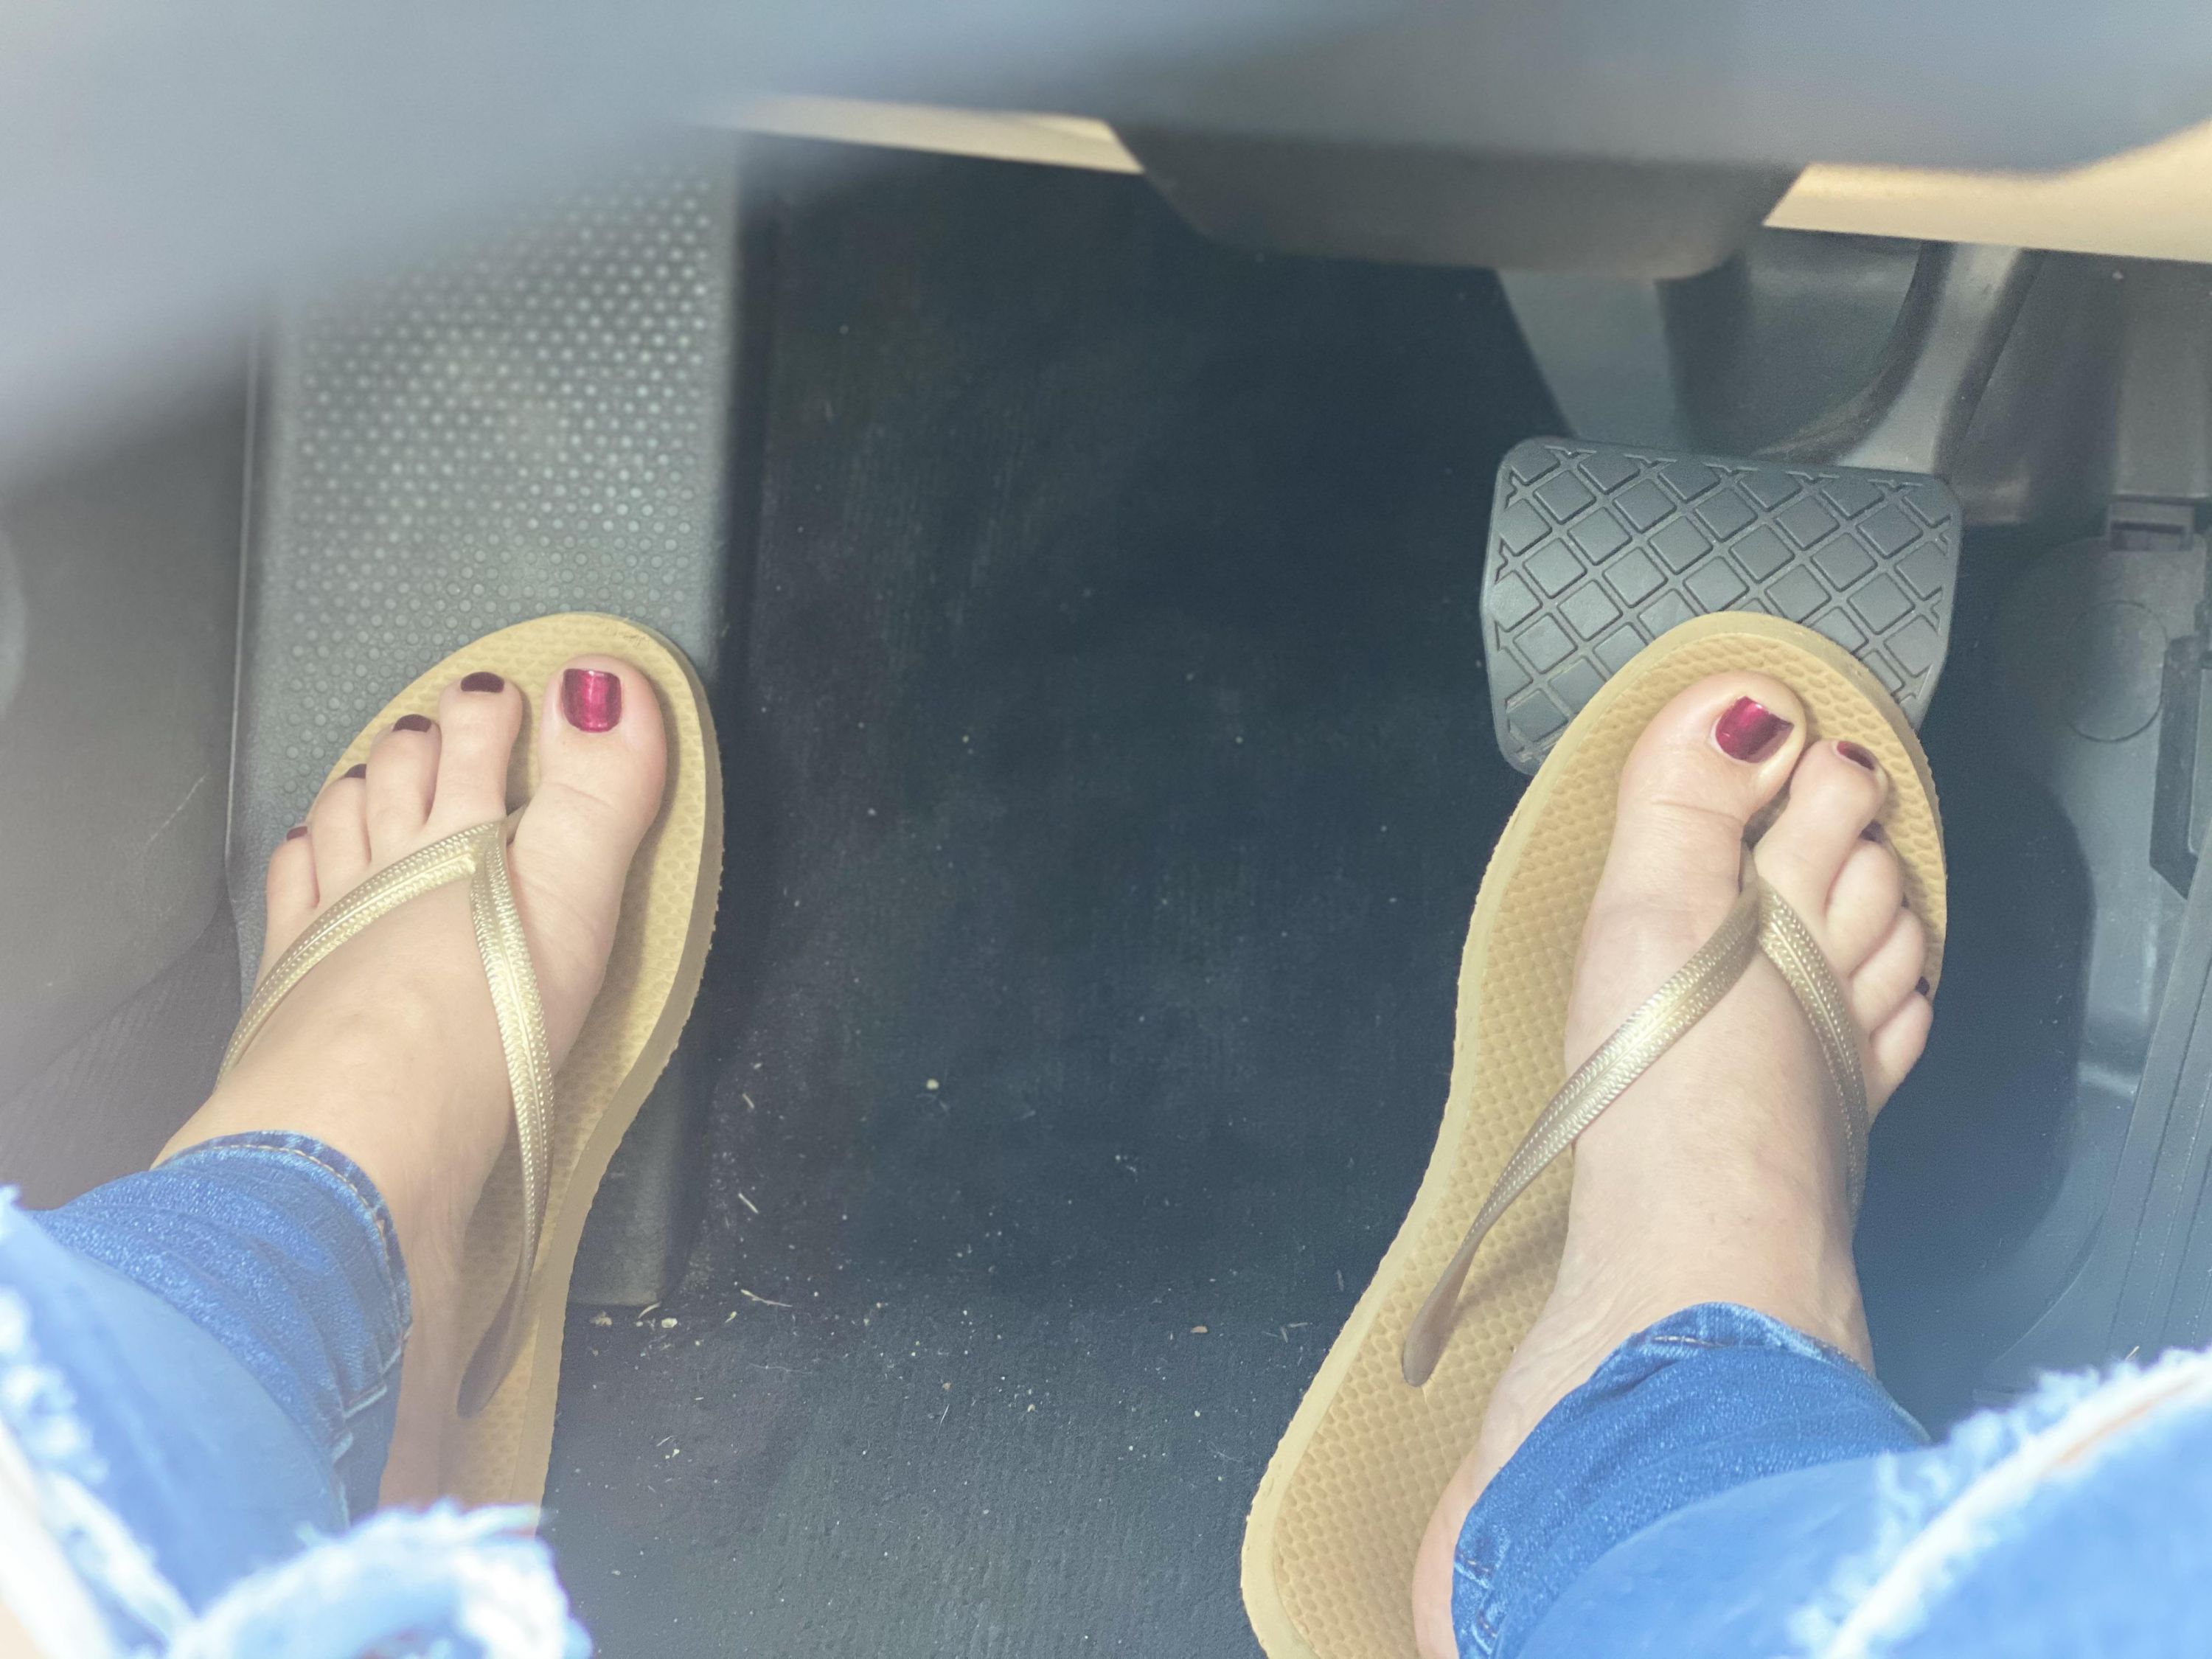 Can you drive while wearing flip flops?